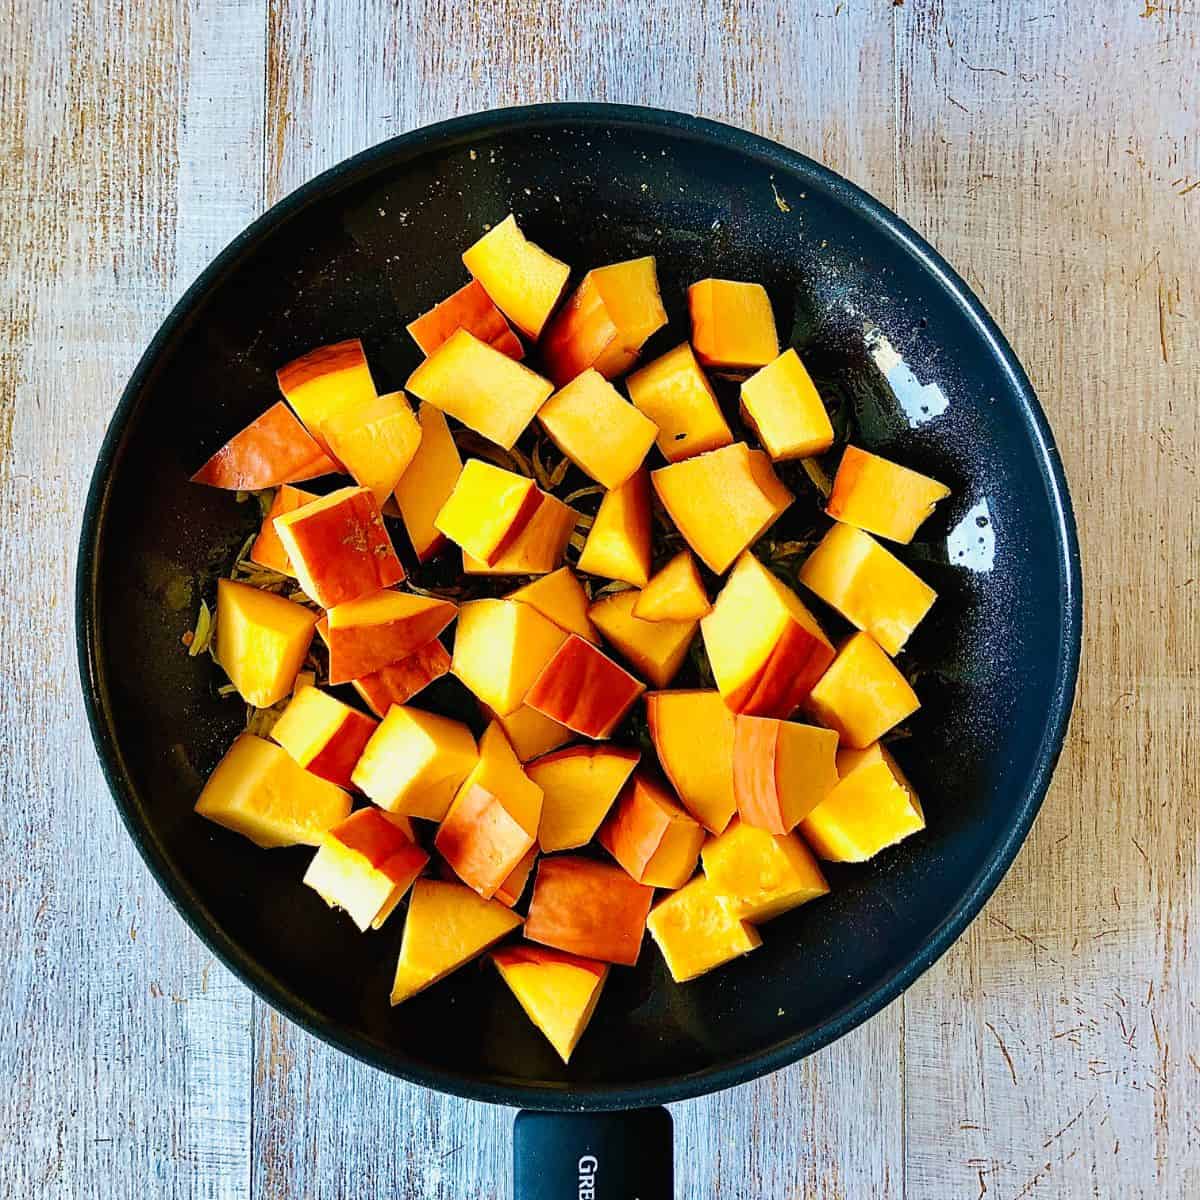 A frying pan containing pumpkin cubes added to a spice mix, ready for cooking.